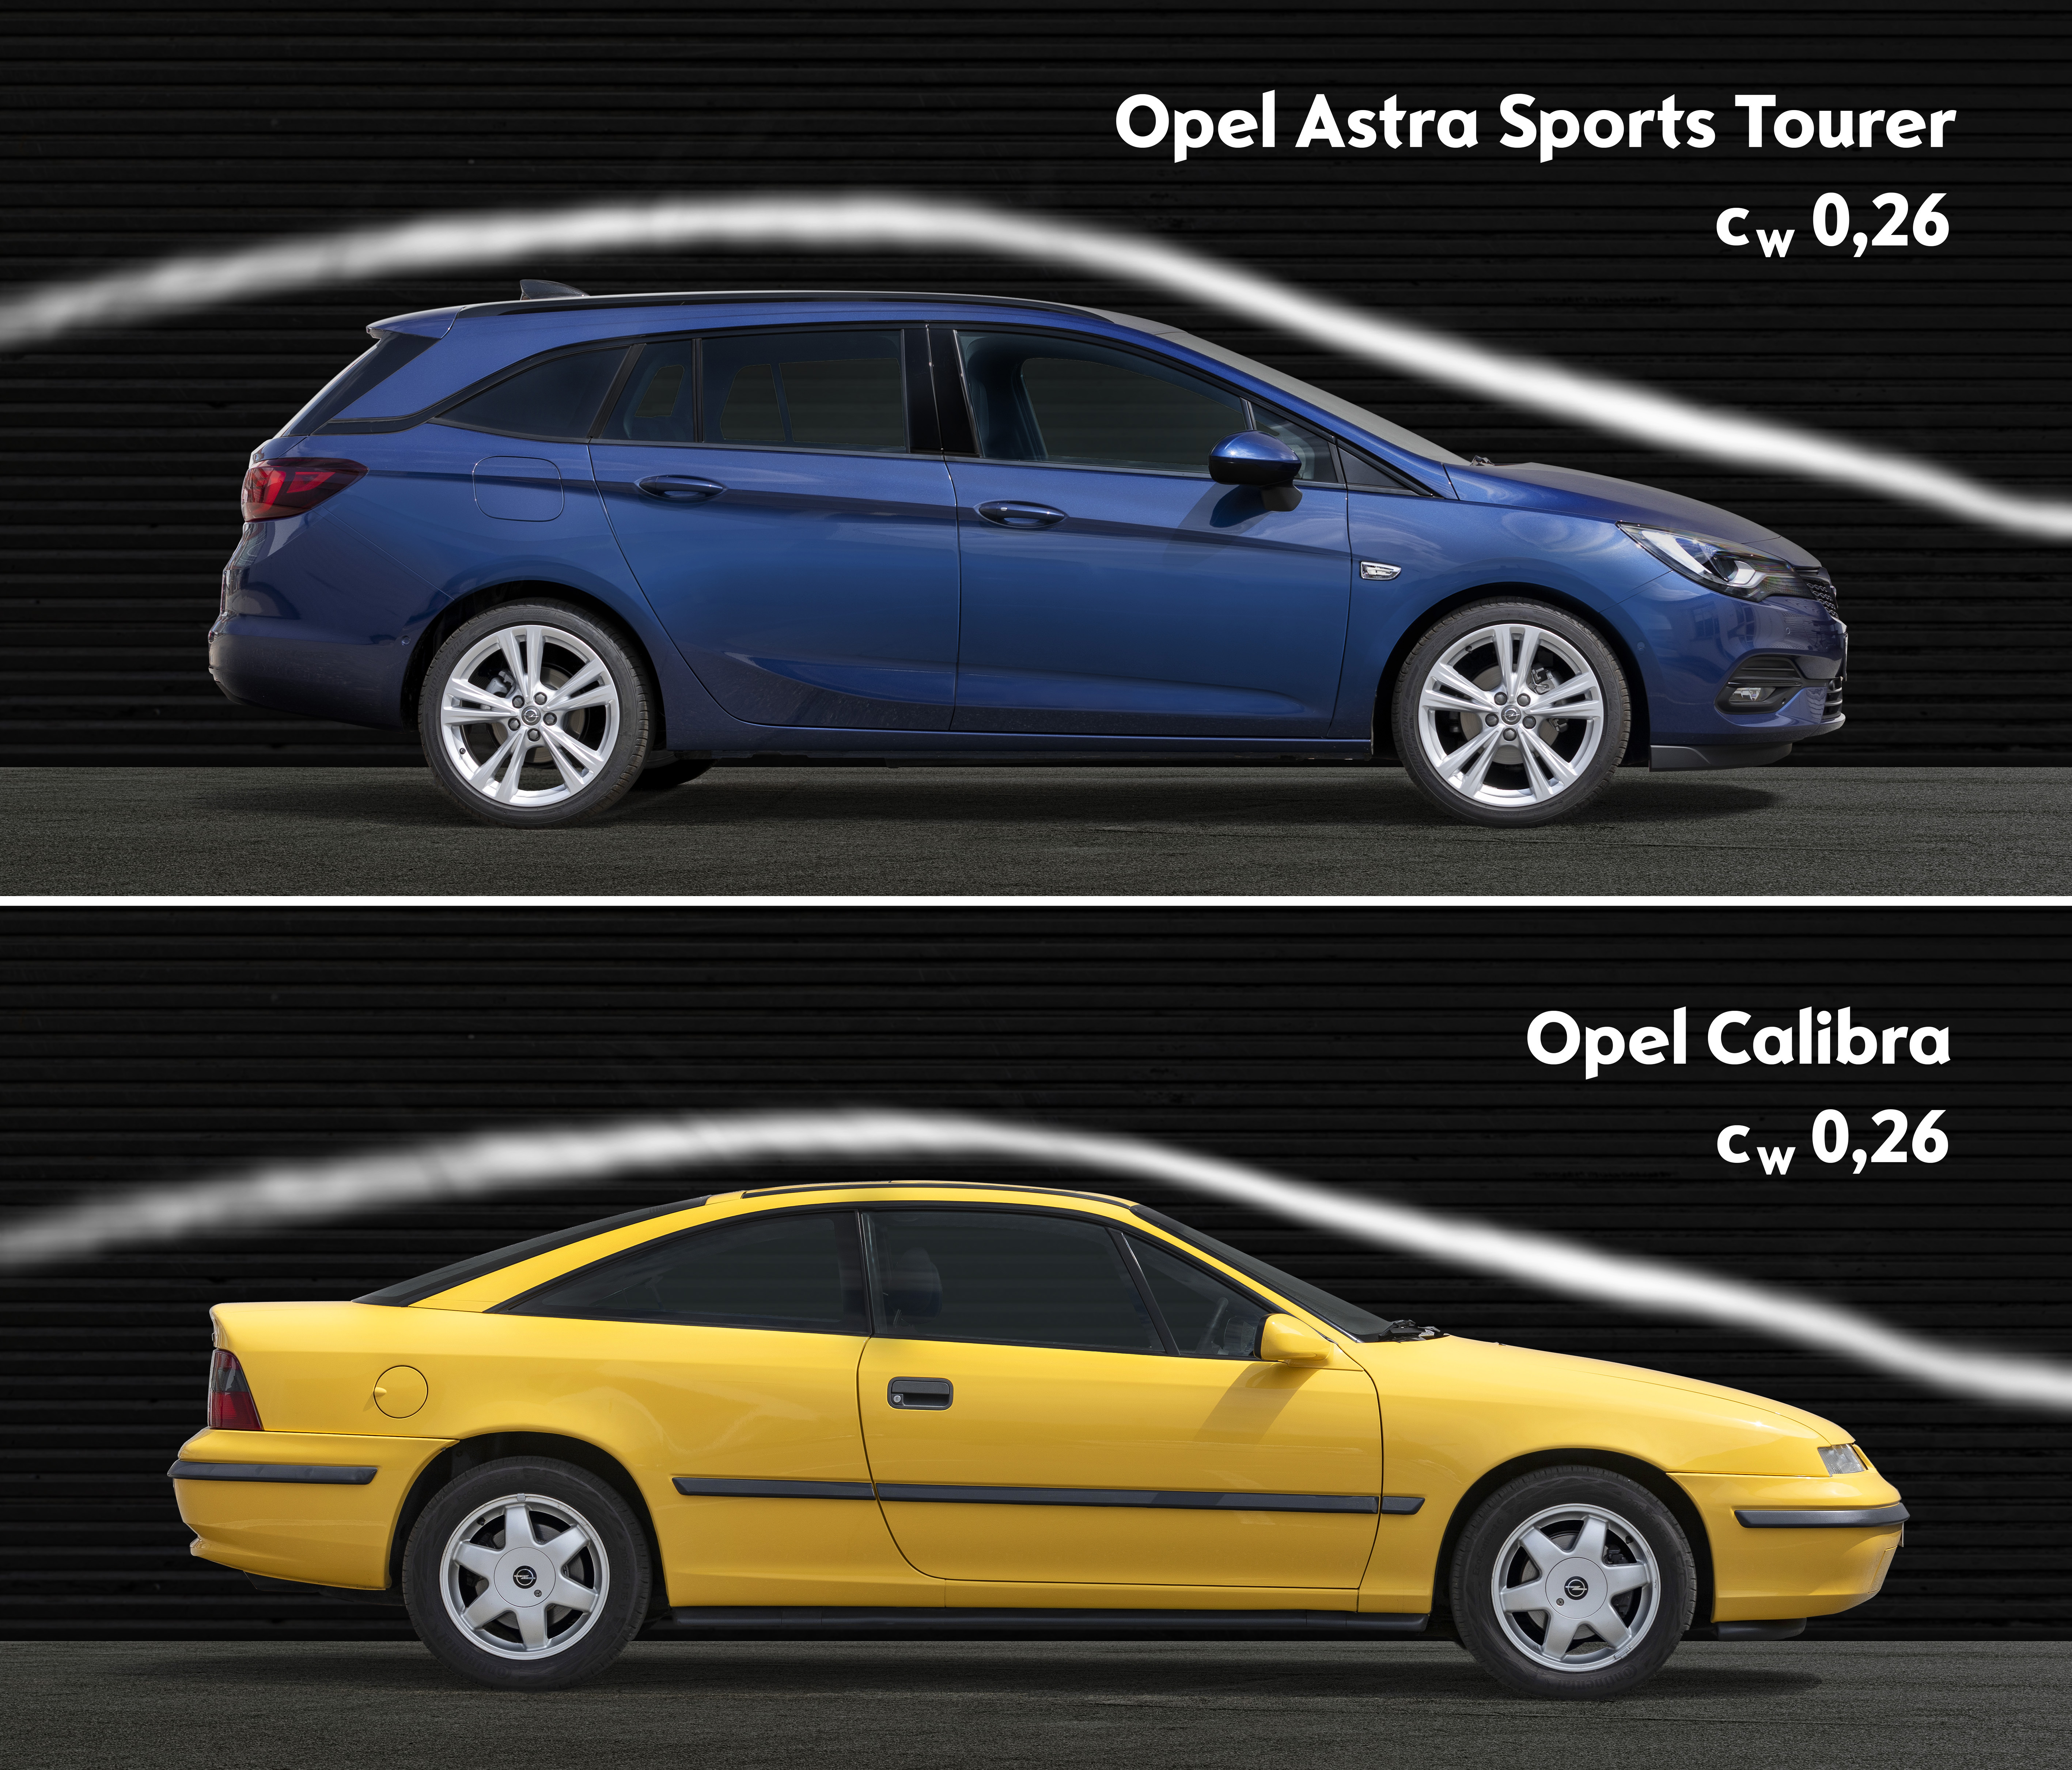 Kings Of Aerodynamics New Opel Astra Shares Calibra S Crown Opel Automobile Gmbh Pressemitteilung Lifepr